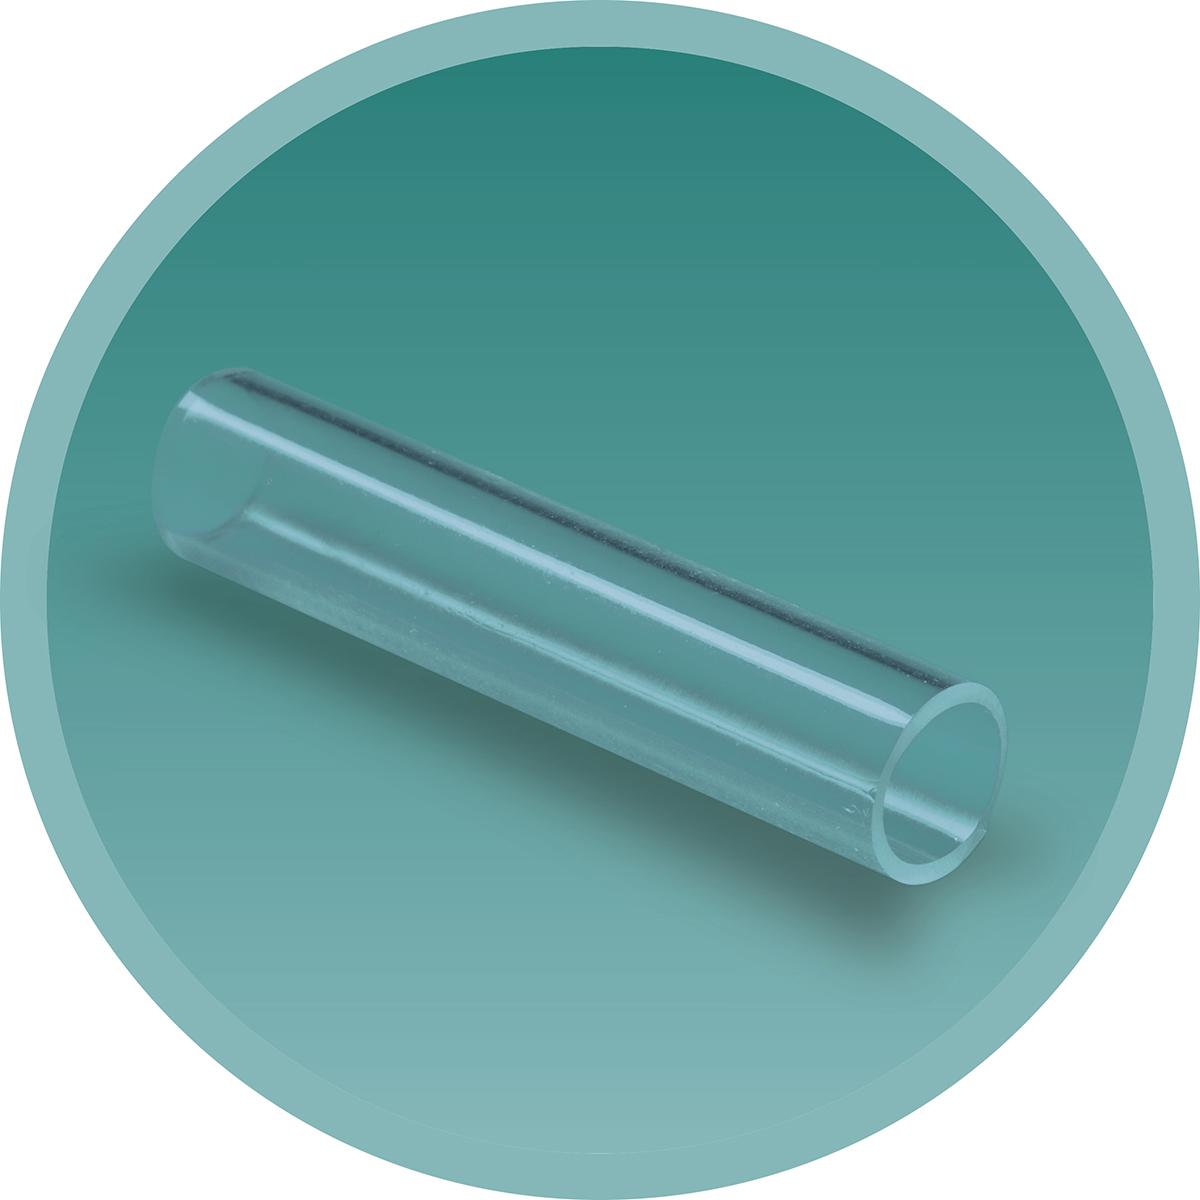 Product Neurolac - synthetic tube for nerve reconstruction - MED&CARE - Innovative Solutions image